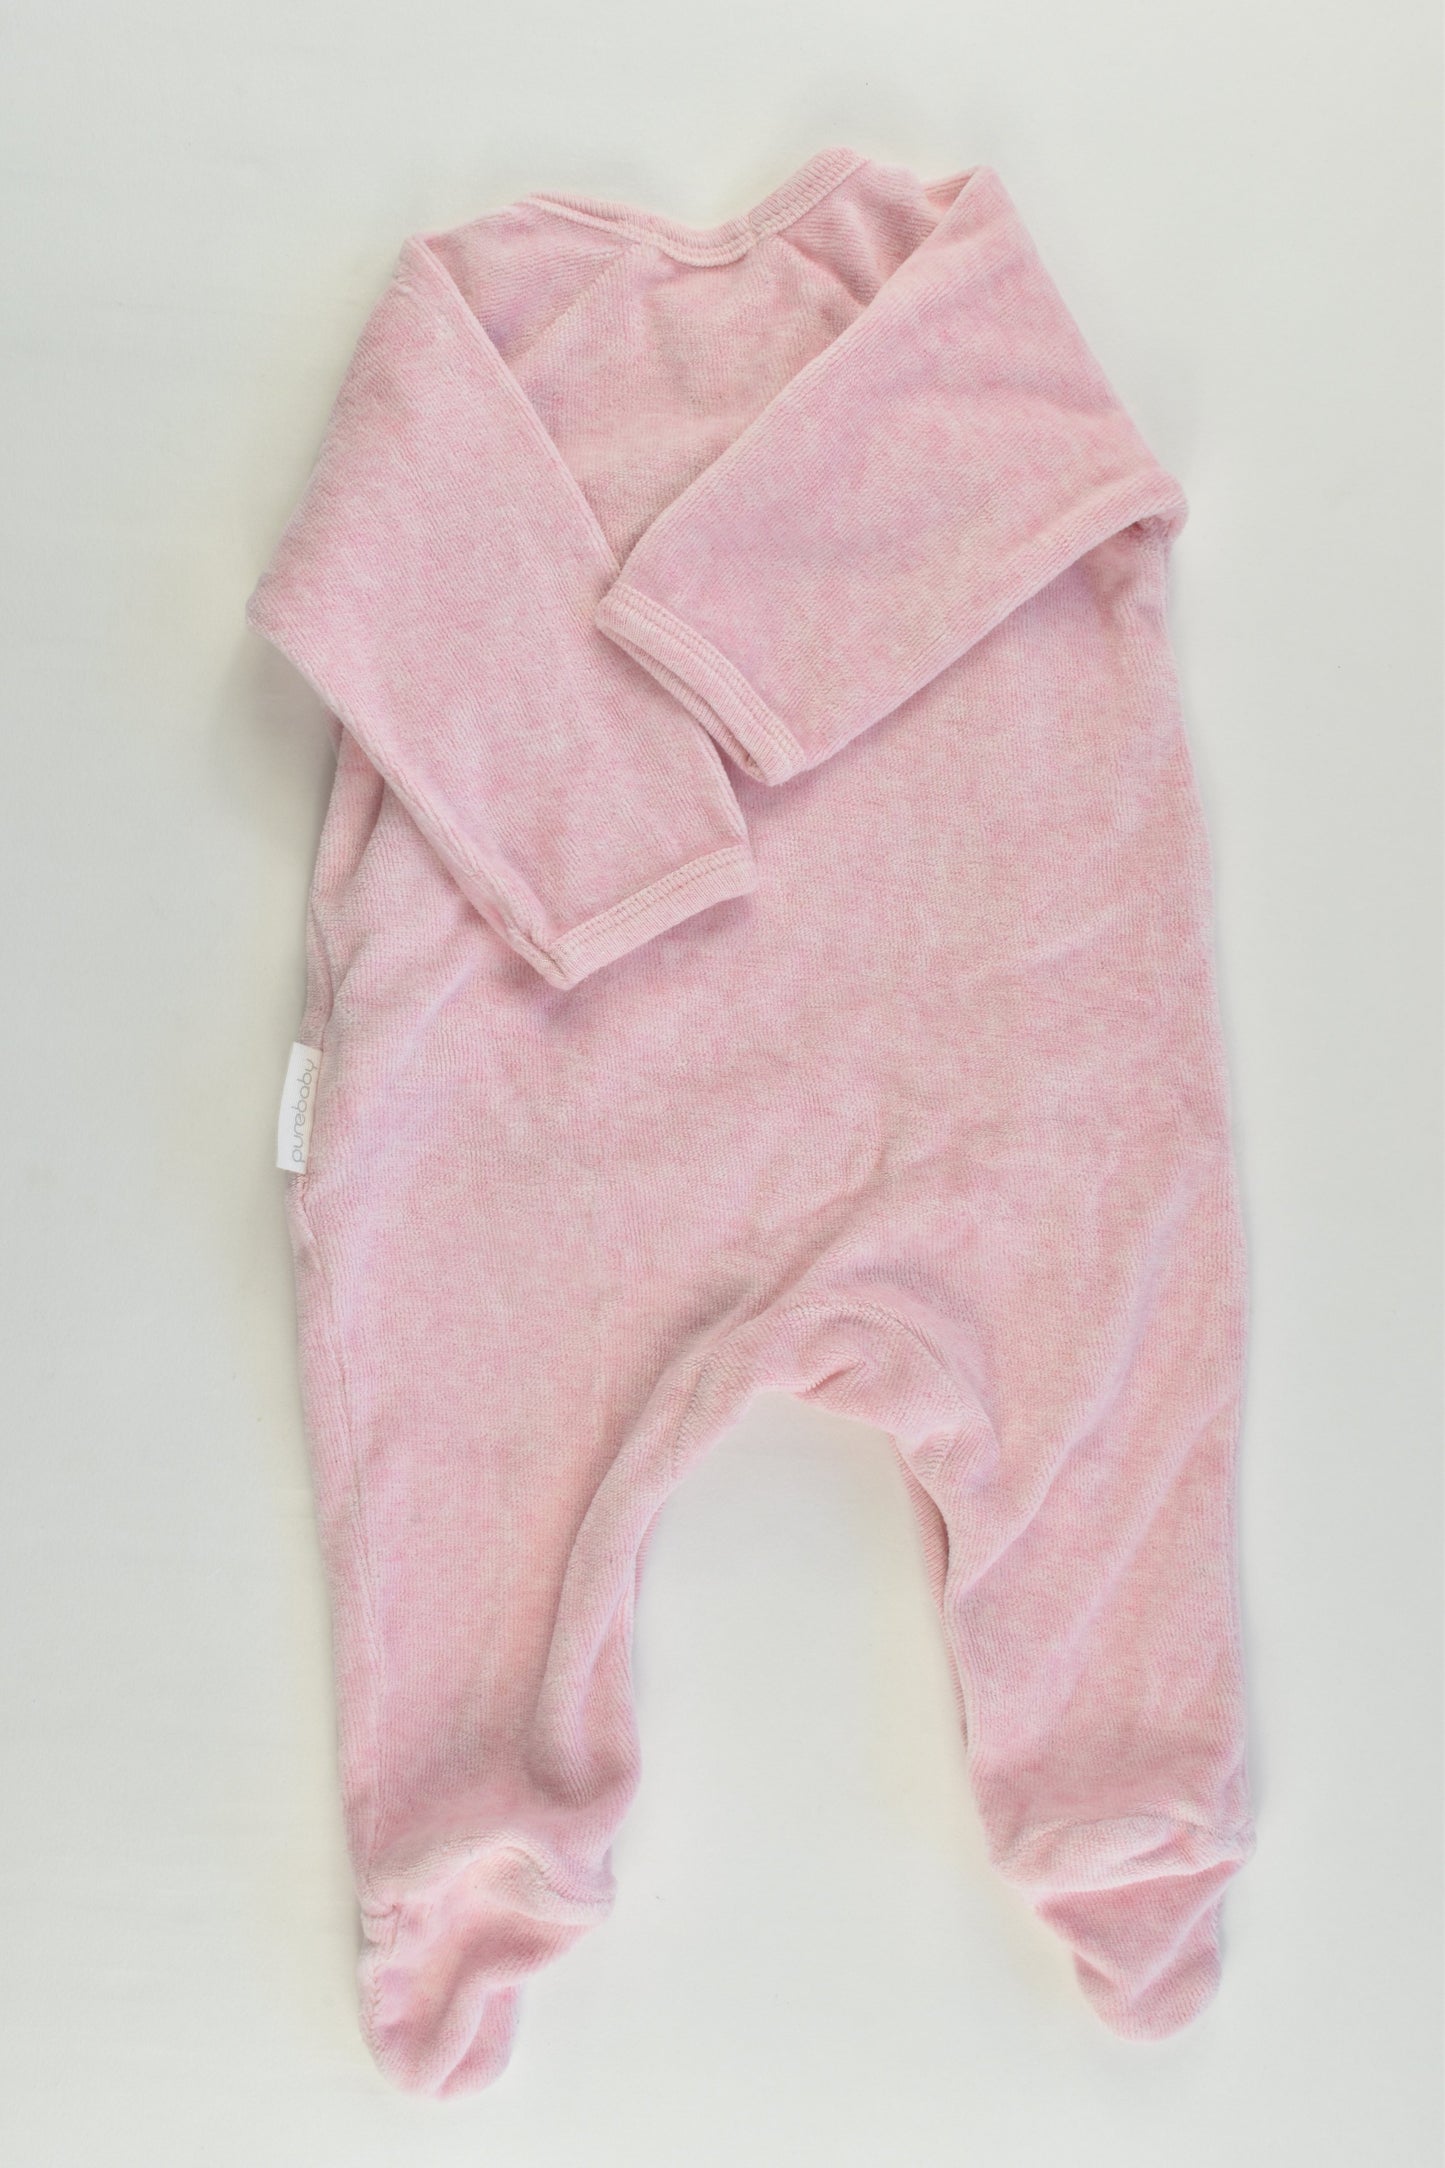 Purebaby Size 000 (0-3 months) Velour Elephant Footed Romper